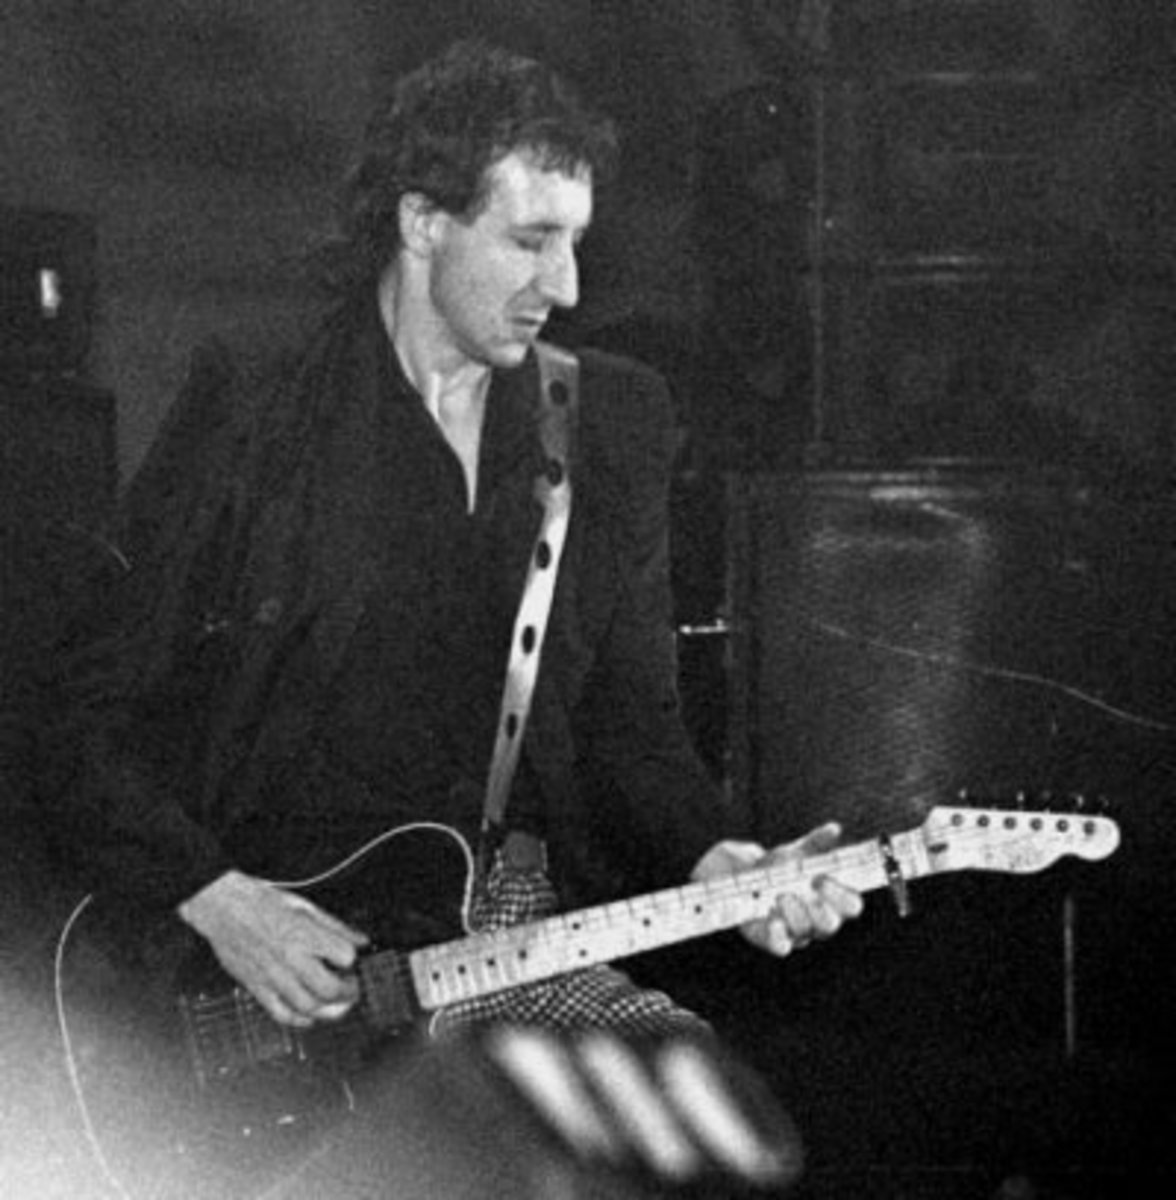 the-great-pete-townshend-and-his-schecter-pt-guitars